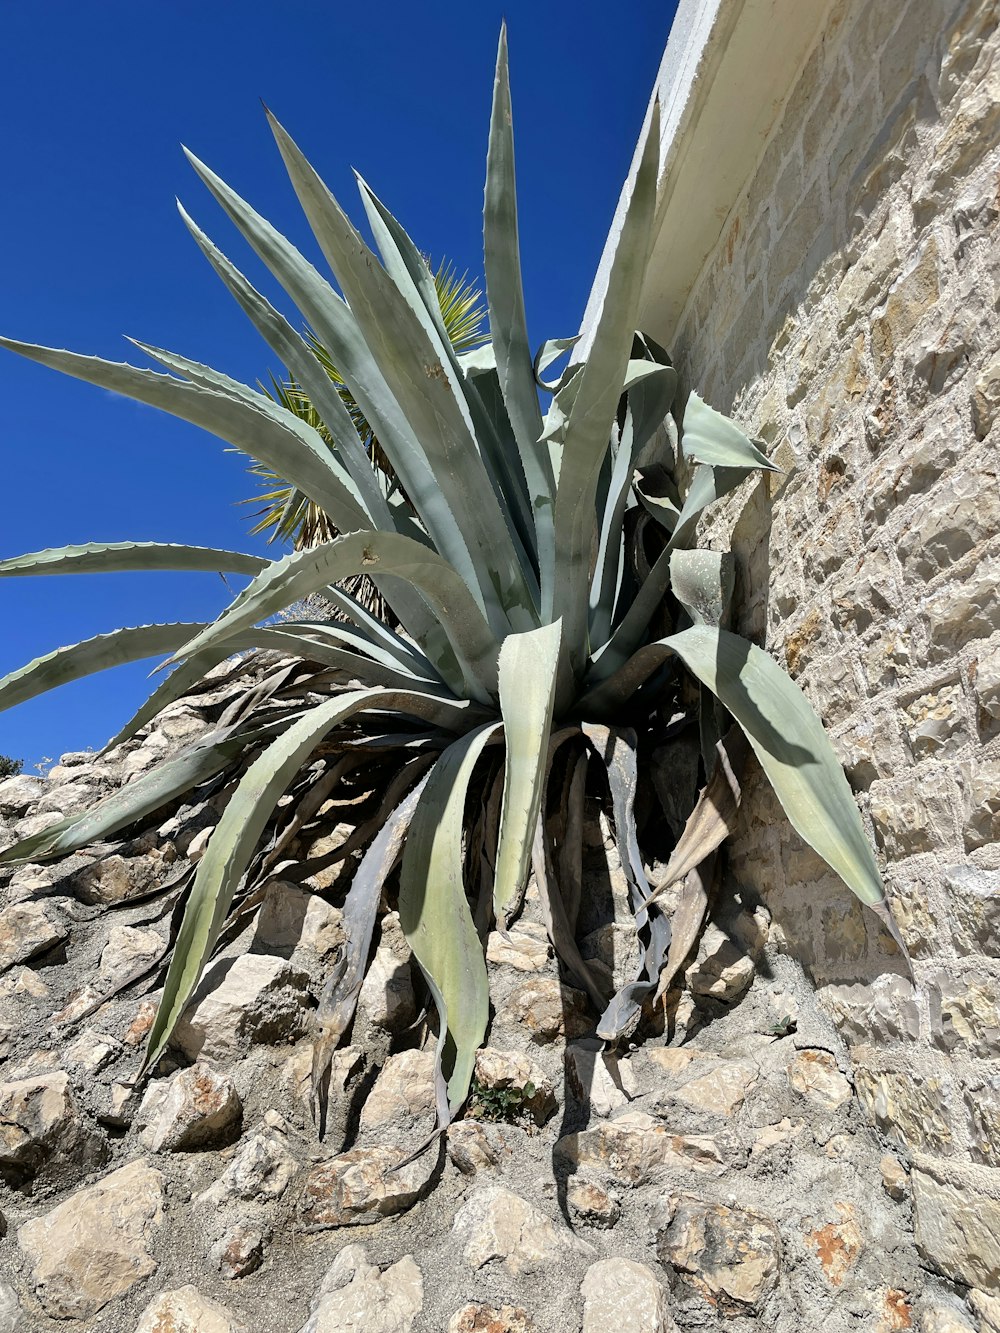 a plant growing in a rocky area